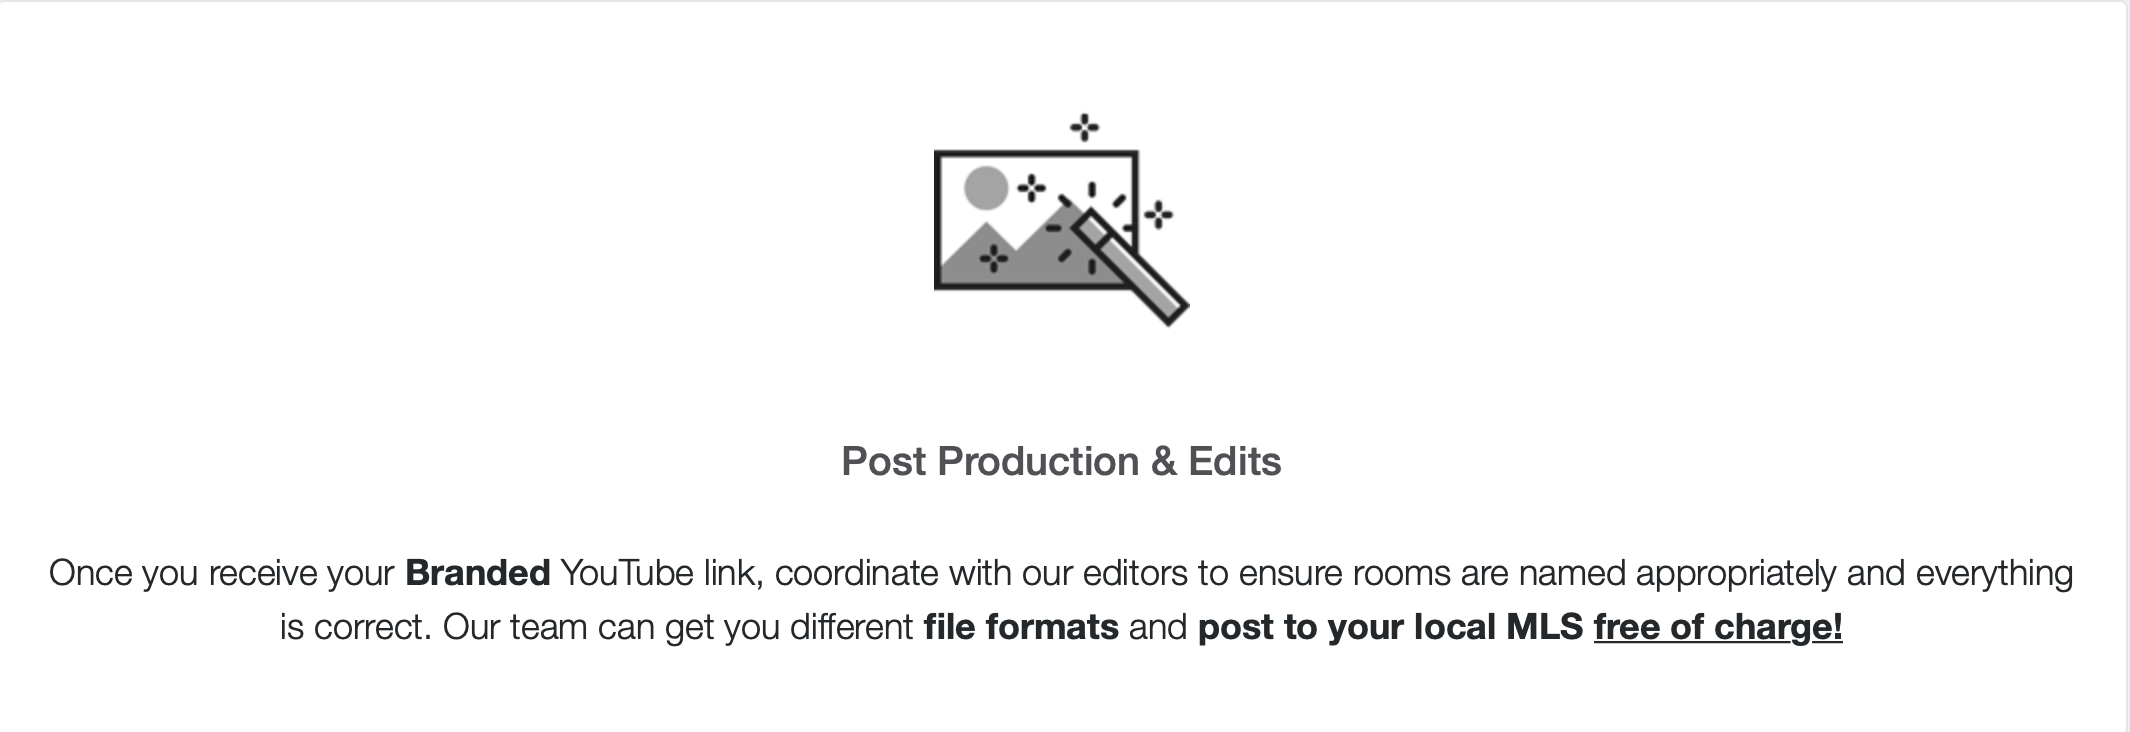 Once you receive your Branded YouTube link, coordinate with our editors to ensure rooms are named appropriately and everything is correct. Our team can get you different file formats and post to your local MLS free of charge!